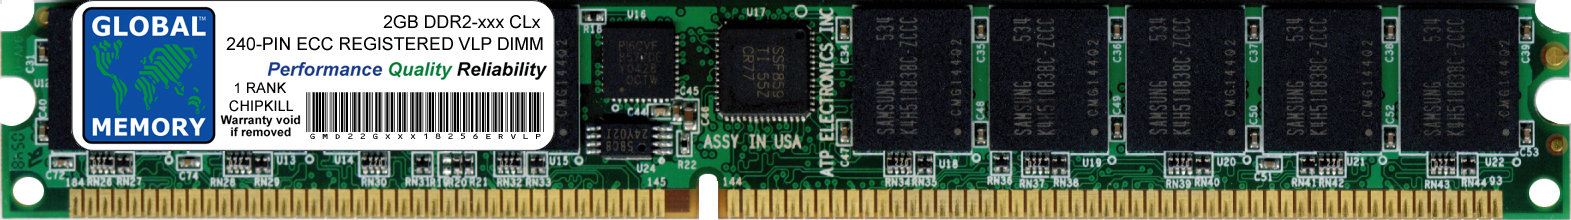 2GB DDR2 400/533/667MHz 240-PIN ECC REGISTERED VLP DIMM (VLP RDIMM) MEMORY RAM FOR SERVERS/WORKSTATIONS/MOTHERBOARDS (1 RANK CHIPKILL)